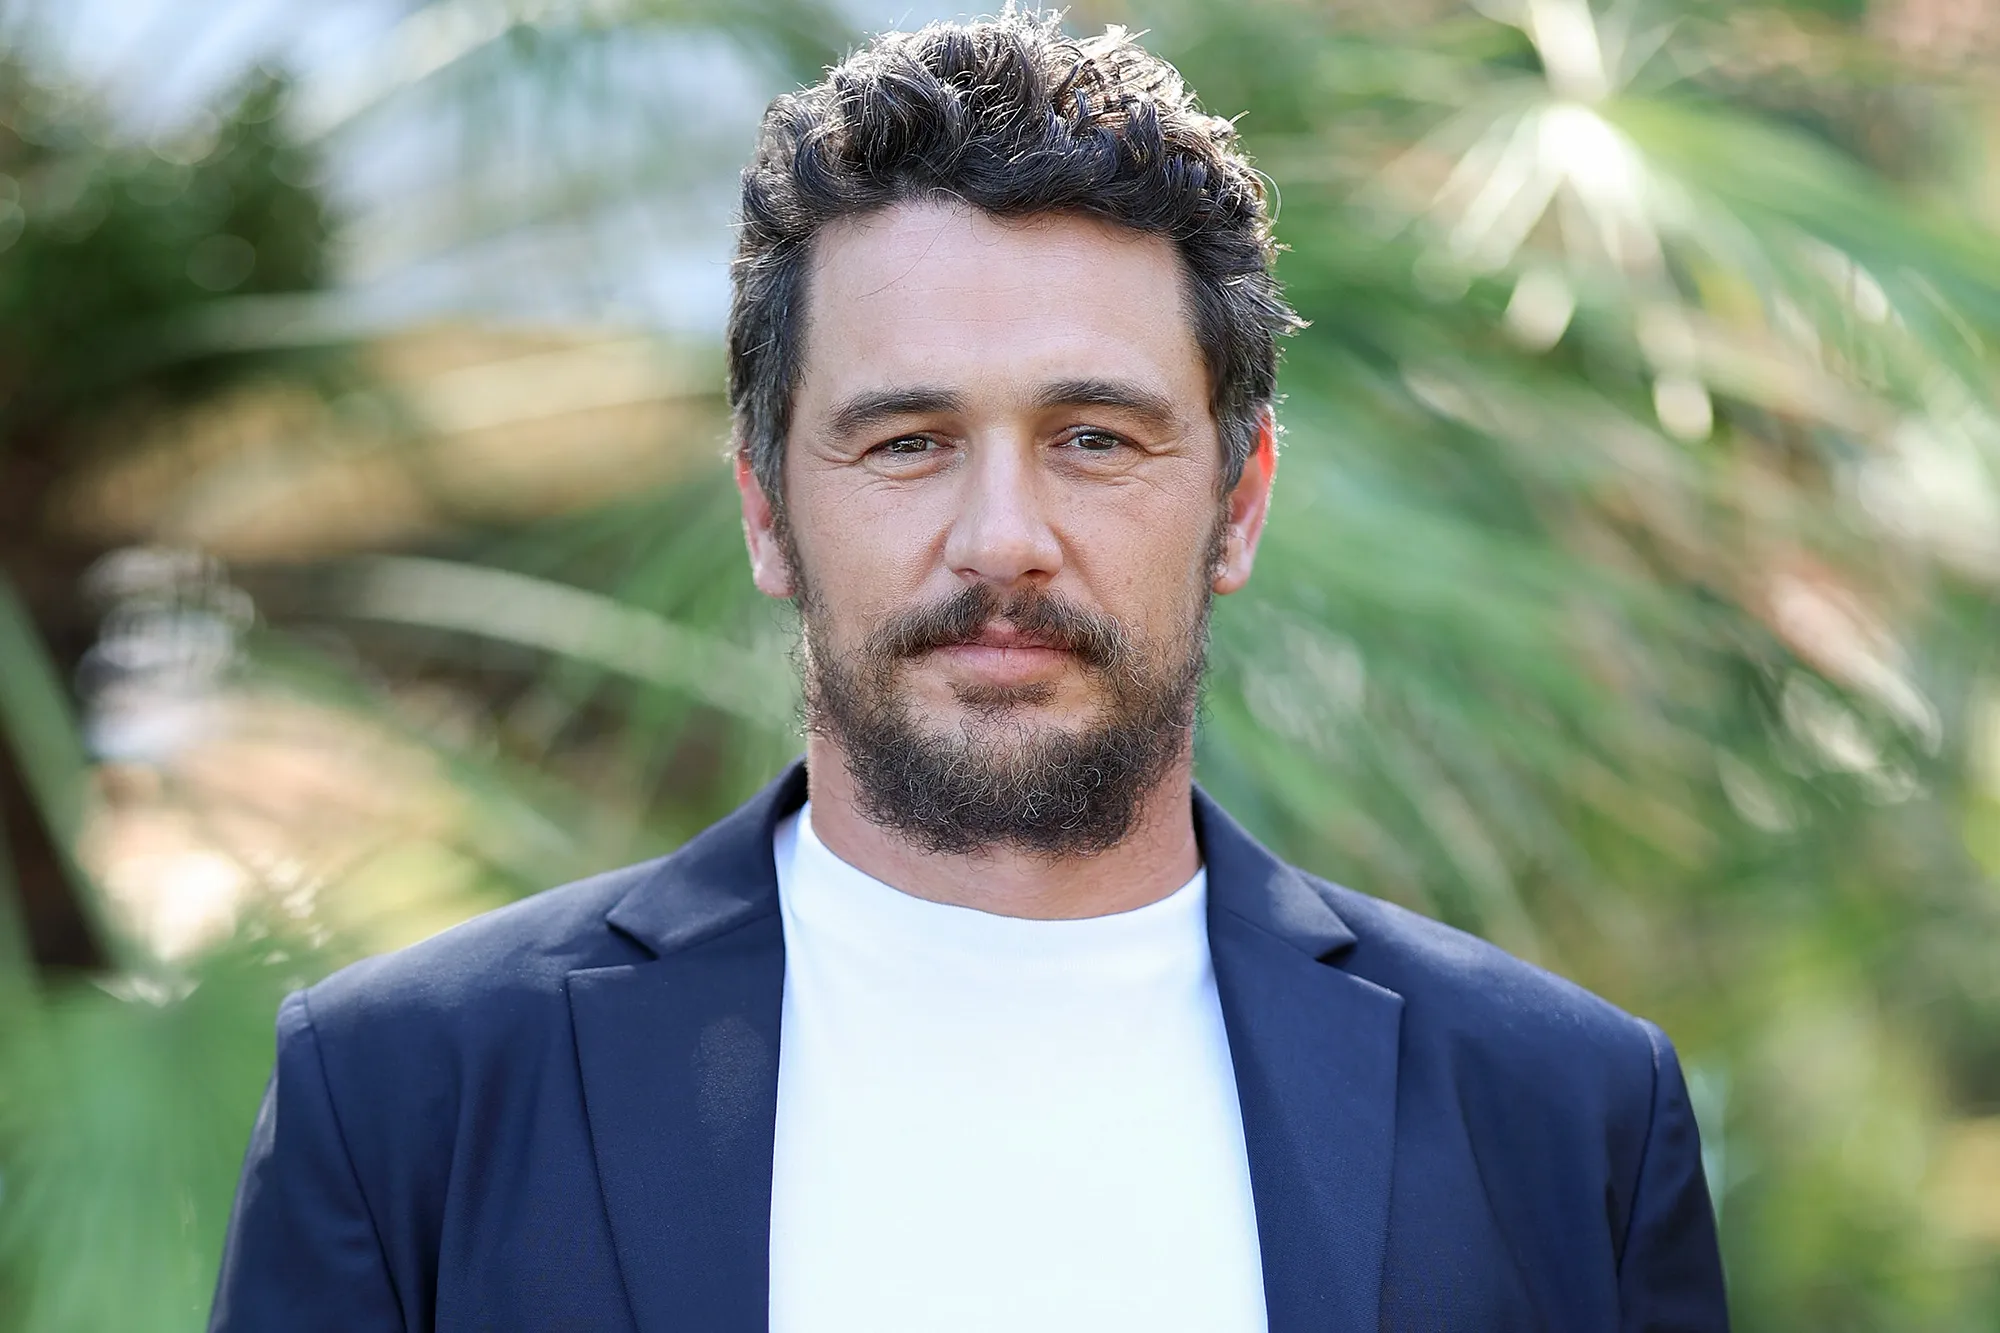 James Franco returns after four years of hiatus to join Bille August's new film "Me, You" | FMV6